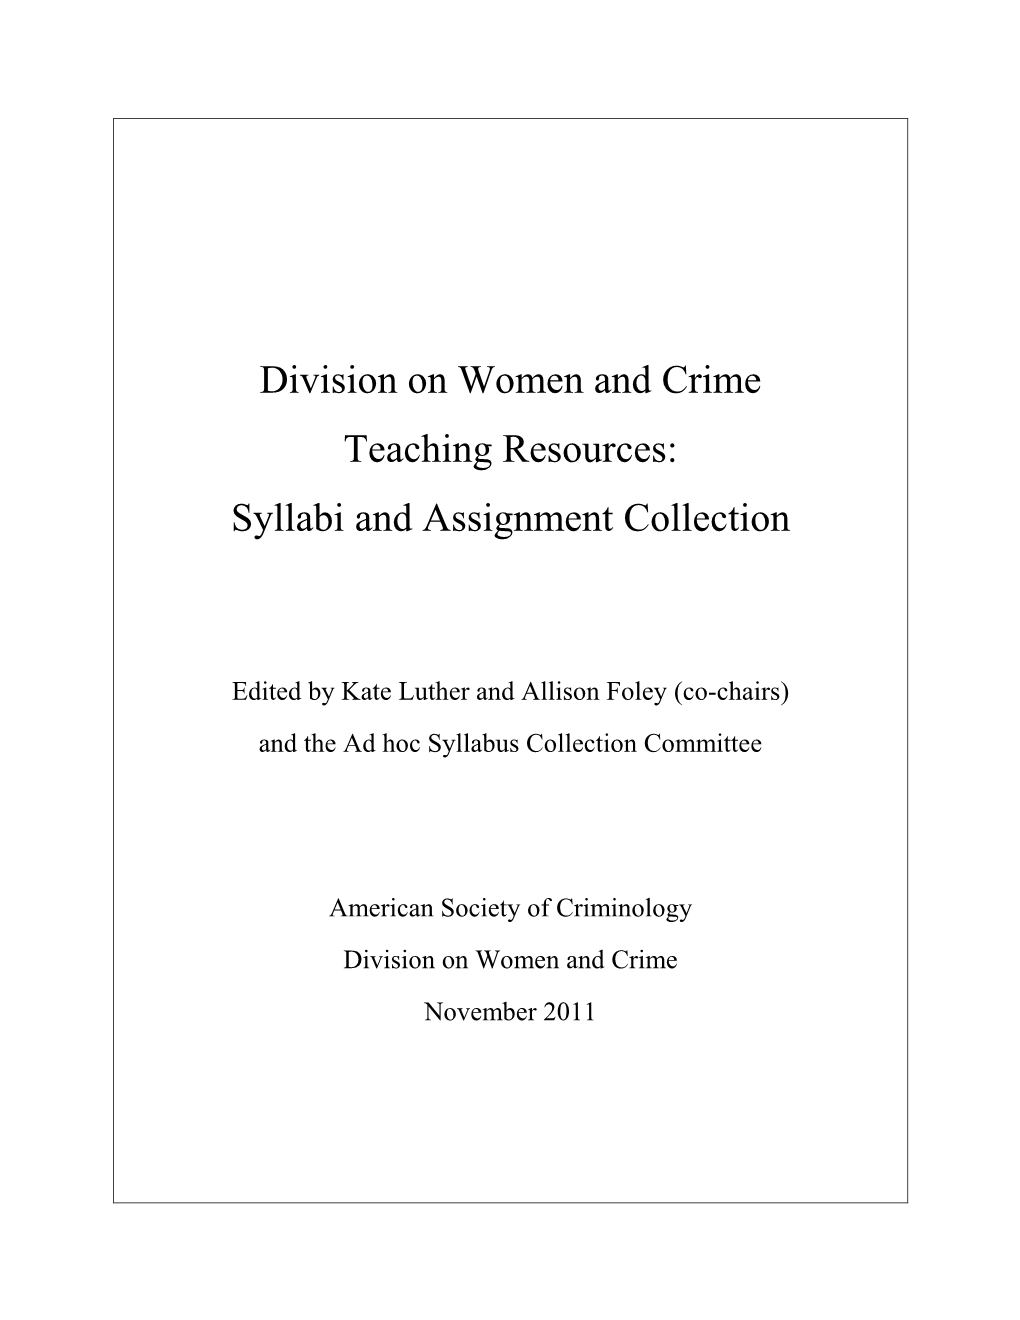 Division on Women and Crime Teaching Resources: Syllabi and Assignment Collection